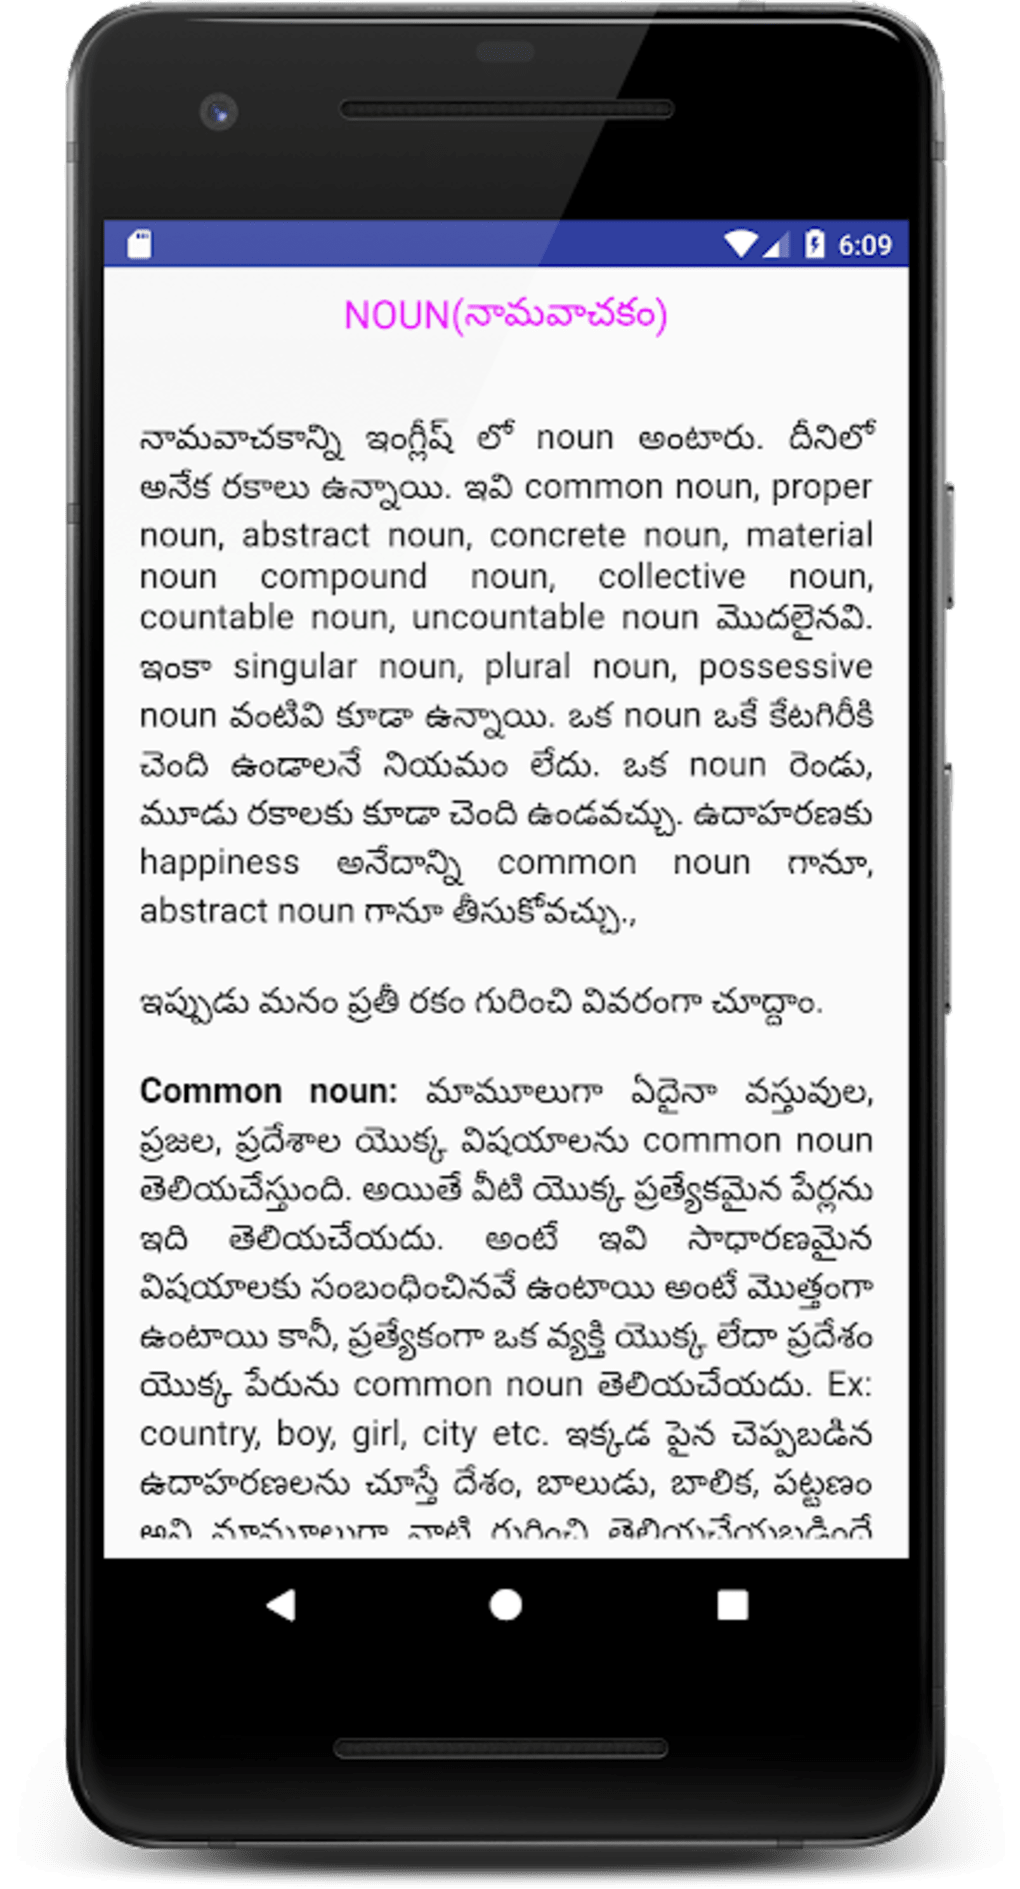 English to Telugu Dictionary - Meaning of Stream in Telugu is